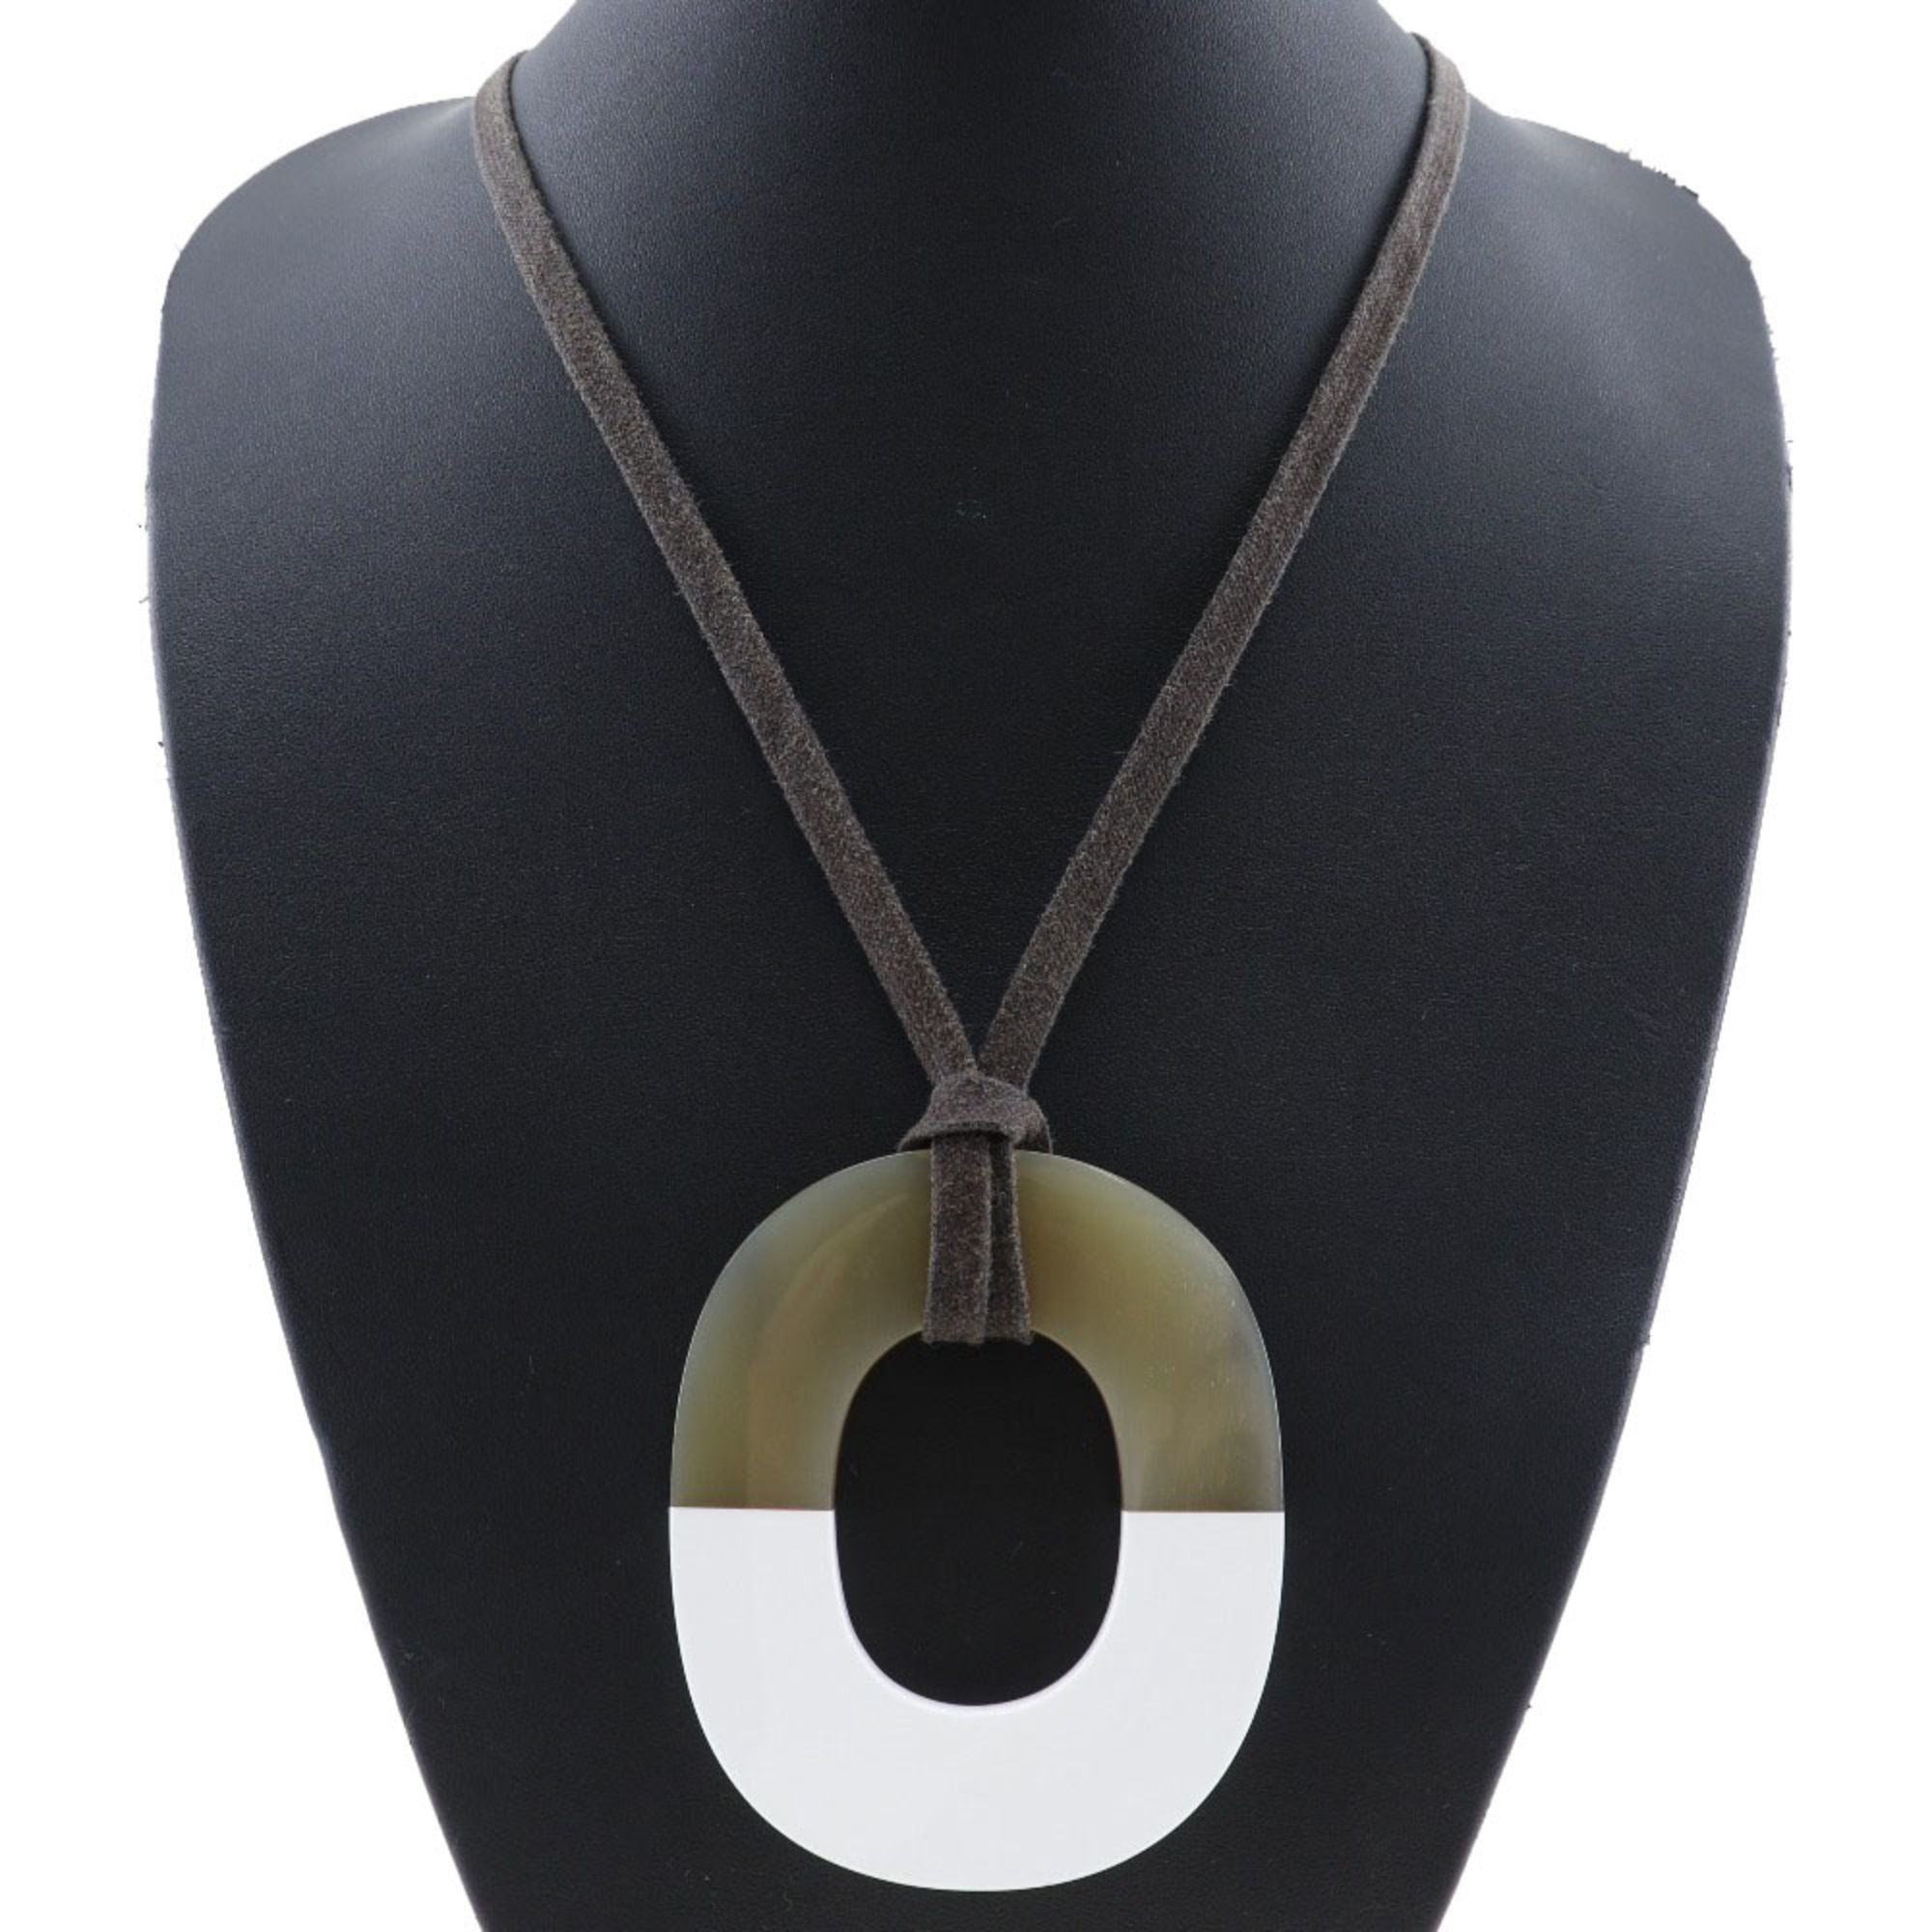 HERMES Ism Necklace Buffalo Horn Made in Vietnam Brown/White Women's